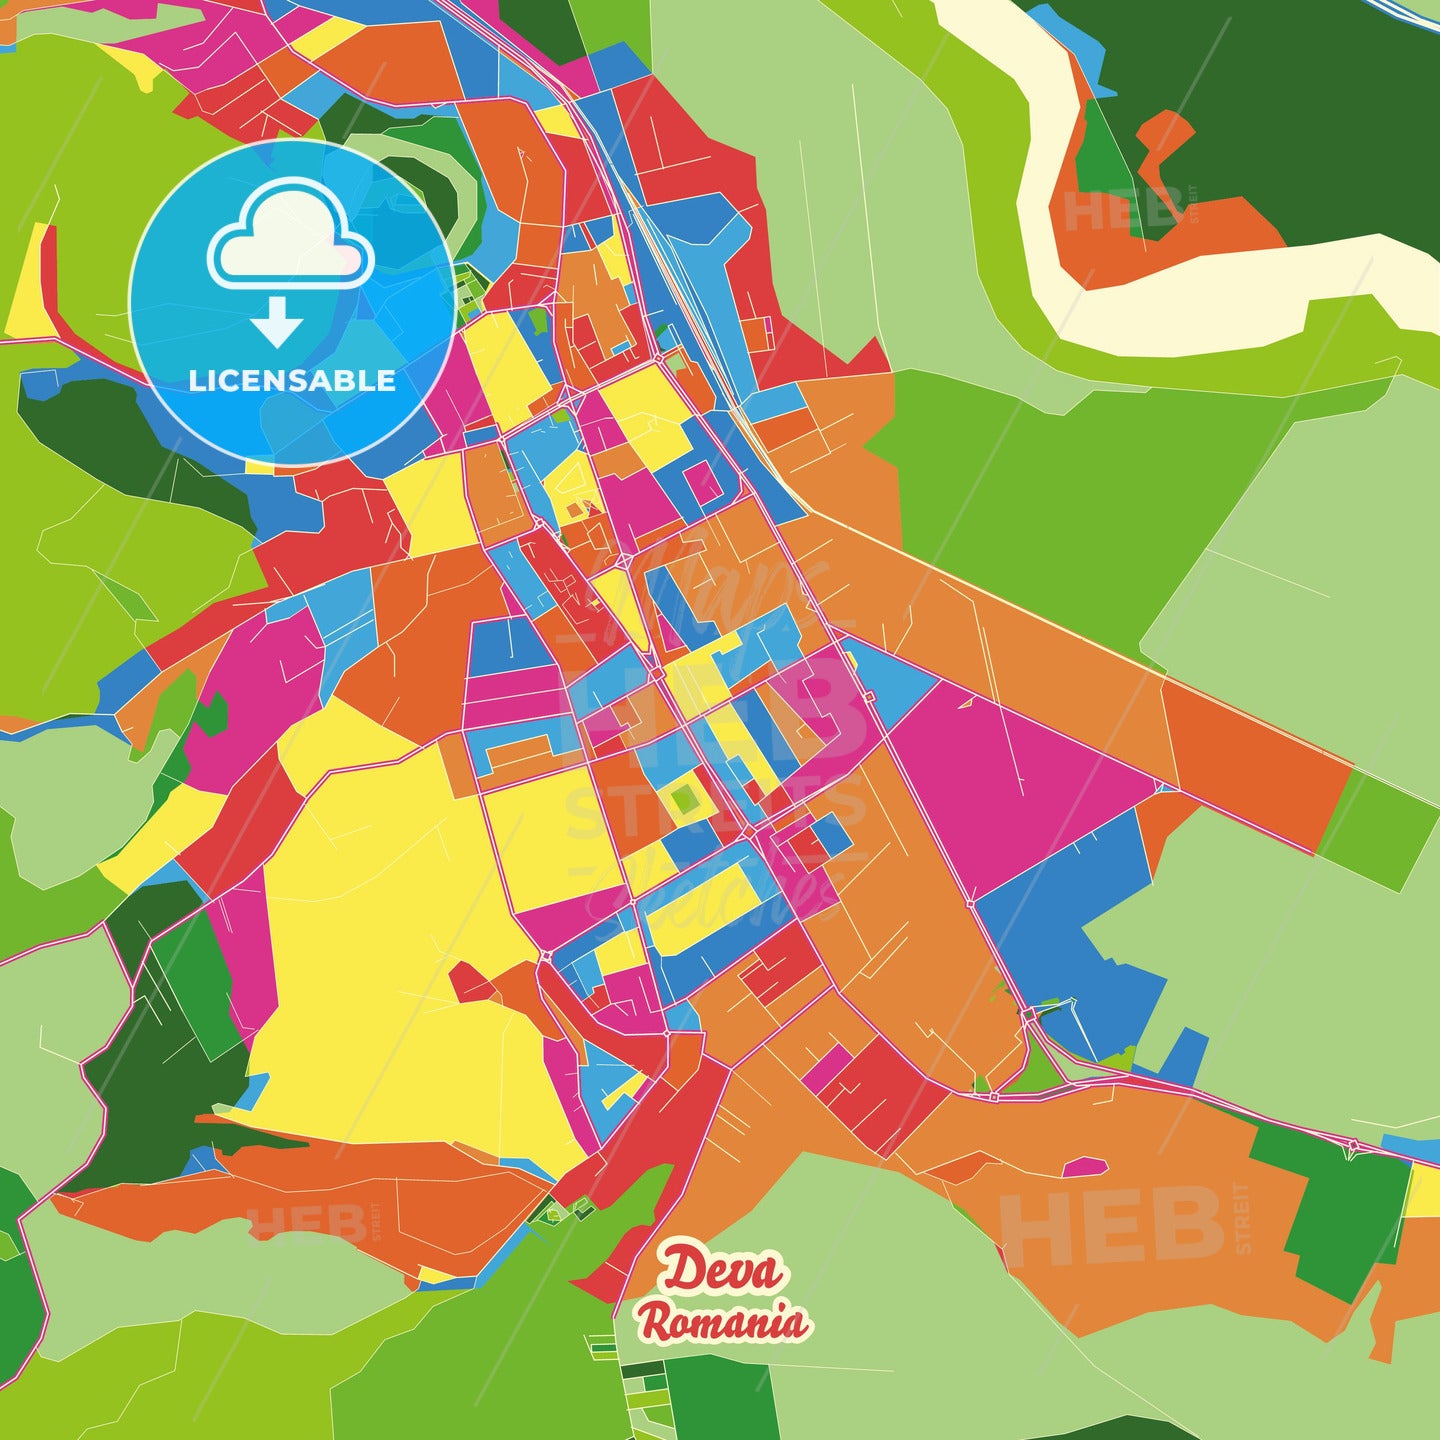 Deva, Romania Crazy Colorful Street Map Poster Template - HEBSTREITS Sketches